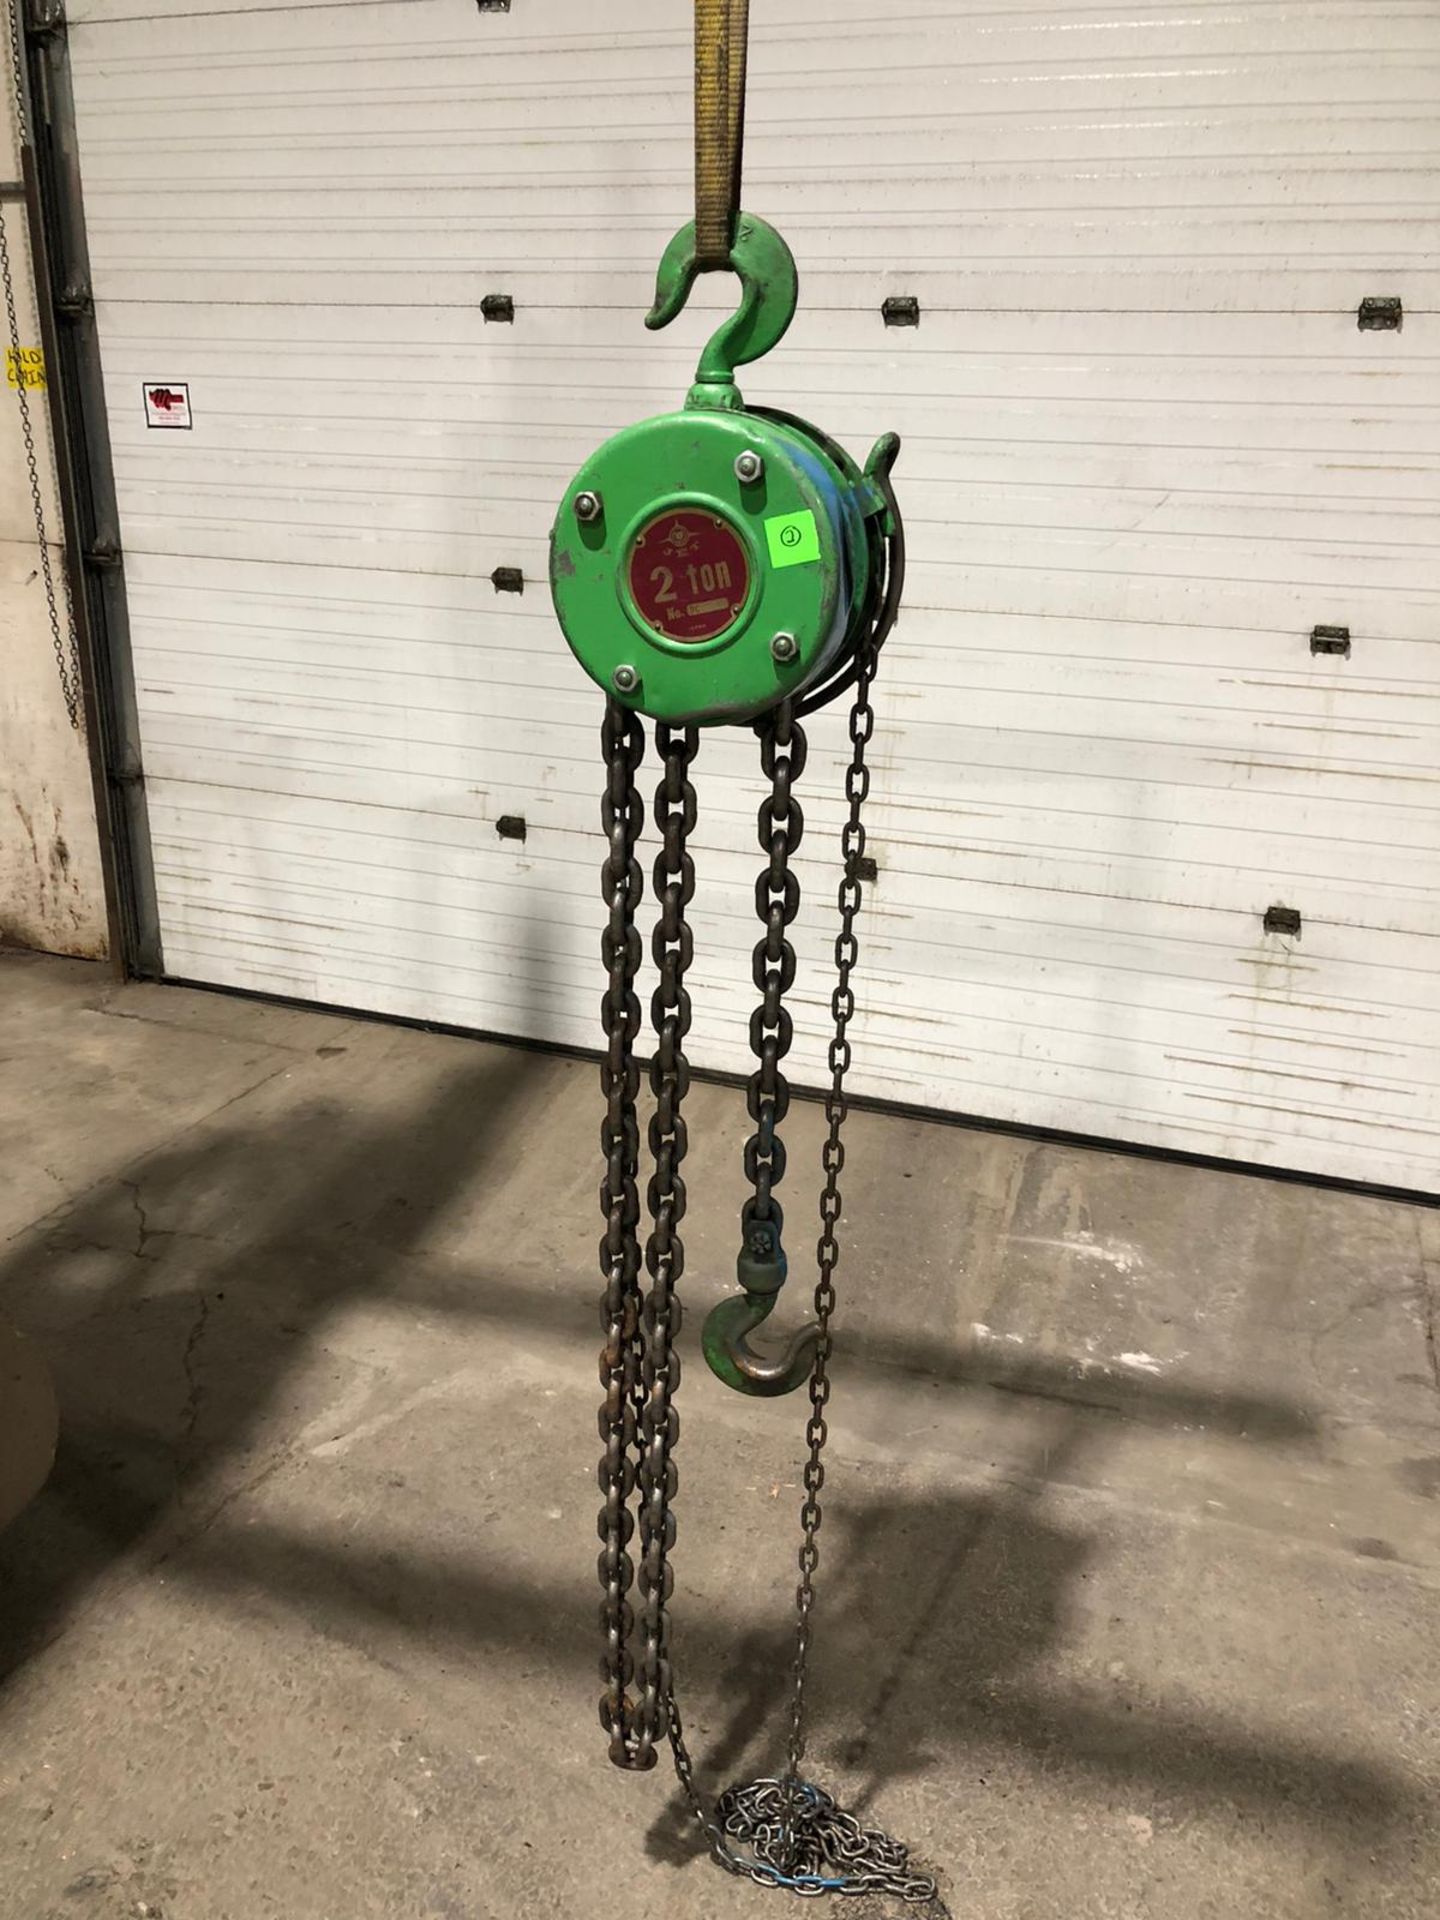 Jet 2 ton Capacity Chain Fall Hoist - 10' long with hoook - Image 3 of 3